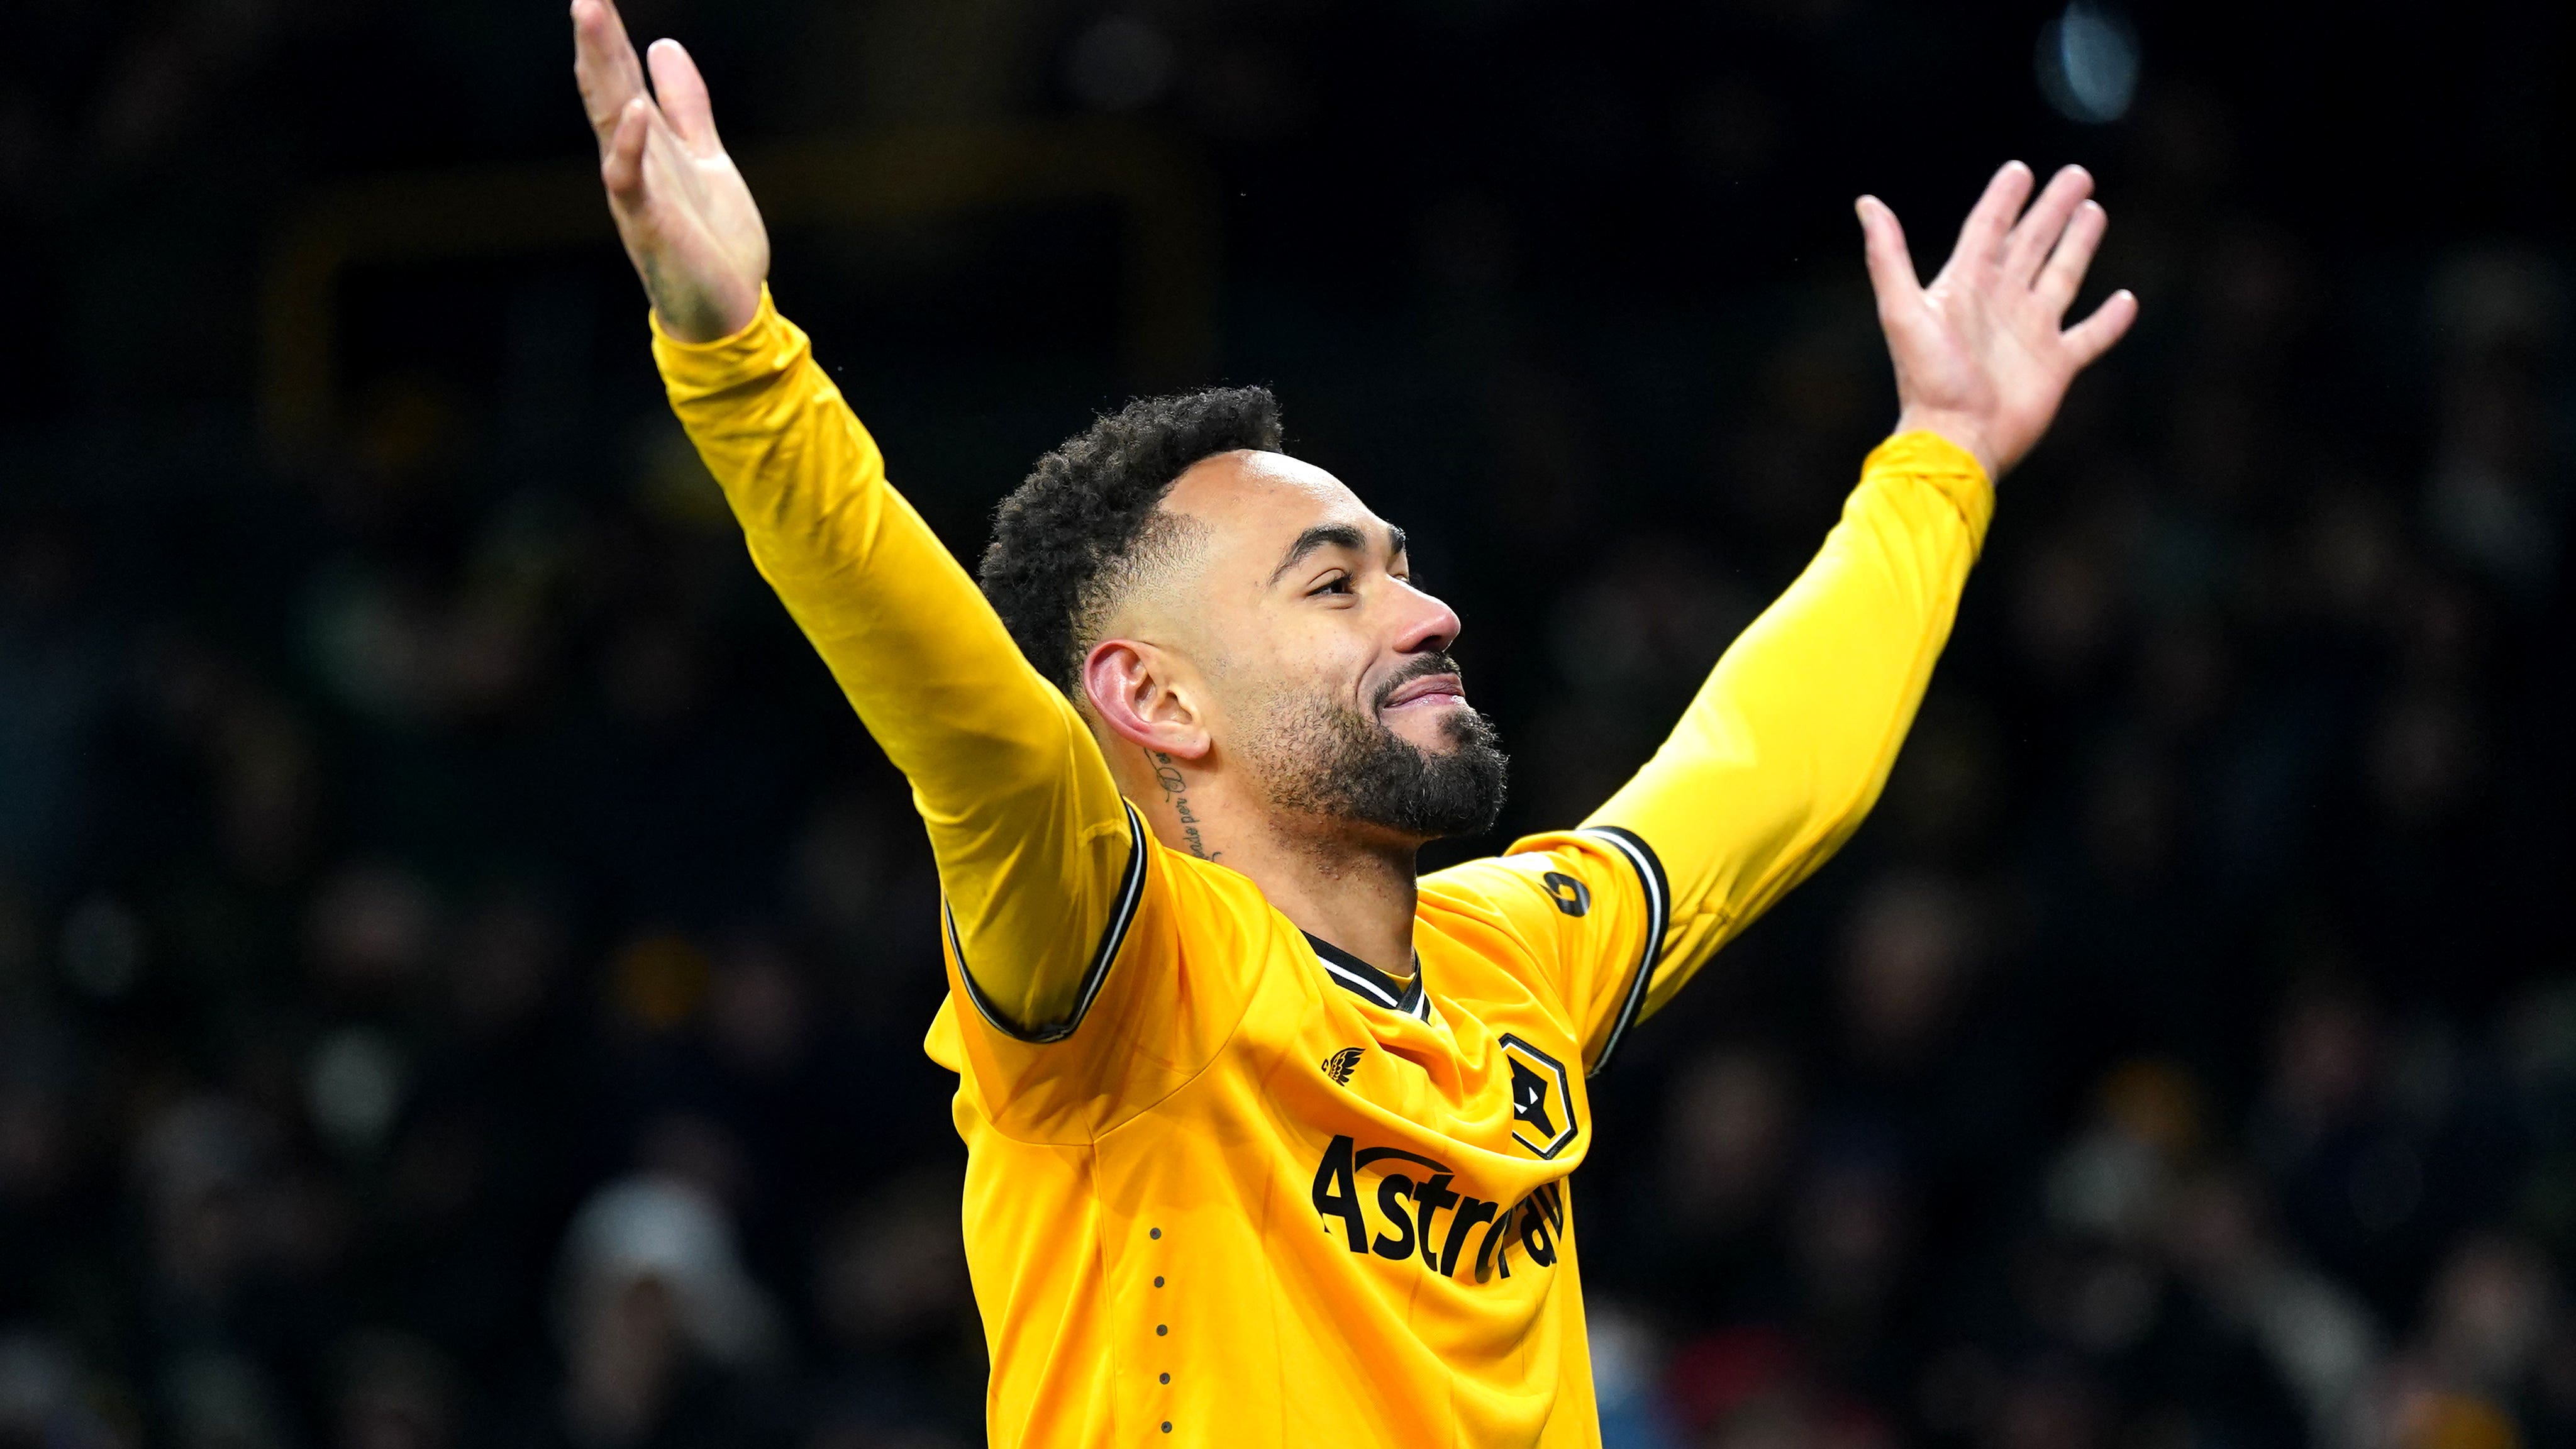 Wolves set up FA Cup derby but Gary O’Neil focused on Brighton